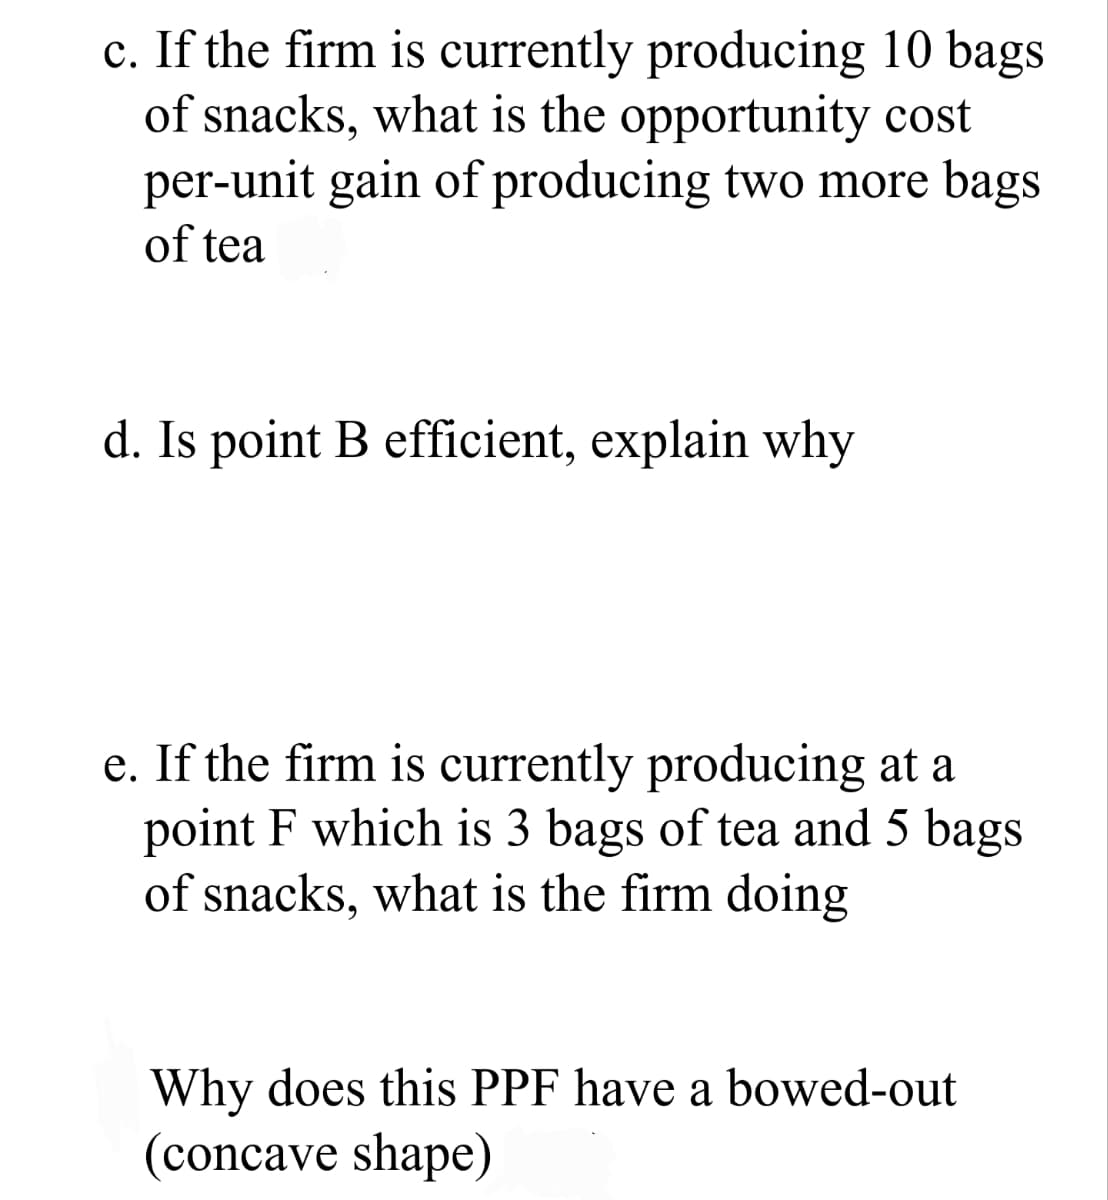 c. If the firm is currently producing 10 bags
of snacks, what is the opportunity cost
per-unit gain of producing two more bags
of tea
d. Is point B efficient, explain why
e. If the firm is currently producing at a
point F which is 3 bags of tea and 5 bags
of snacks, what is the firm doing
Why does this PPF have a bowed-out
(concave shape)
